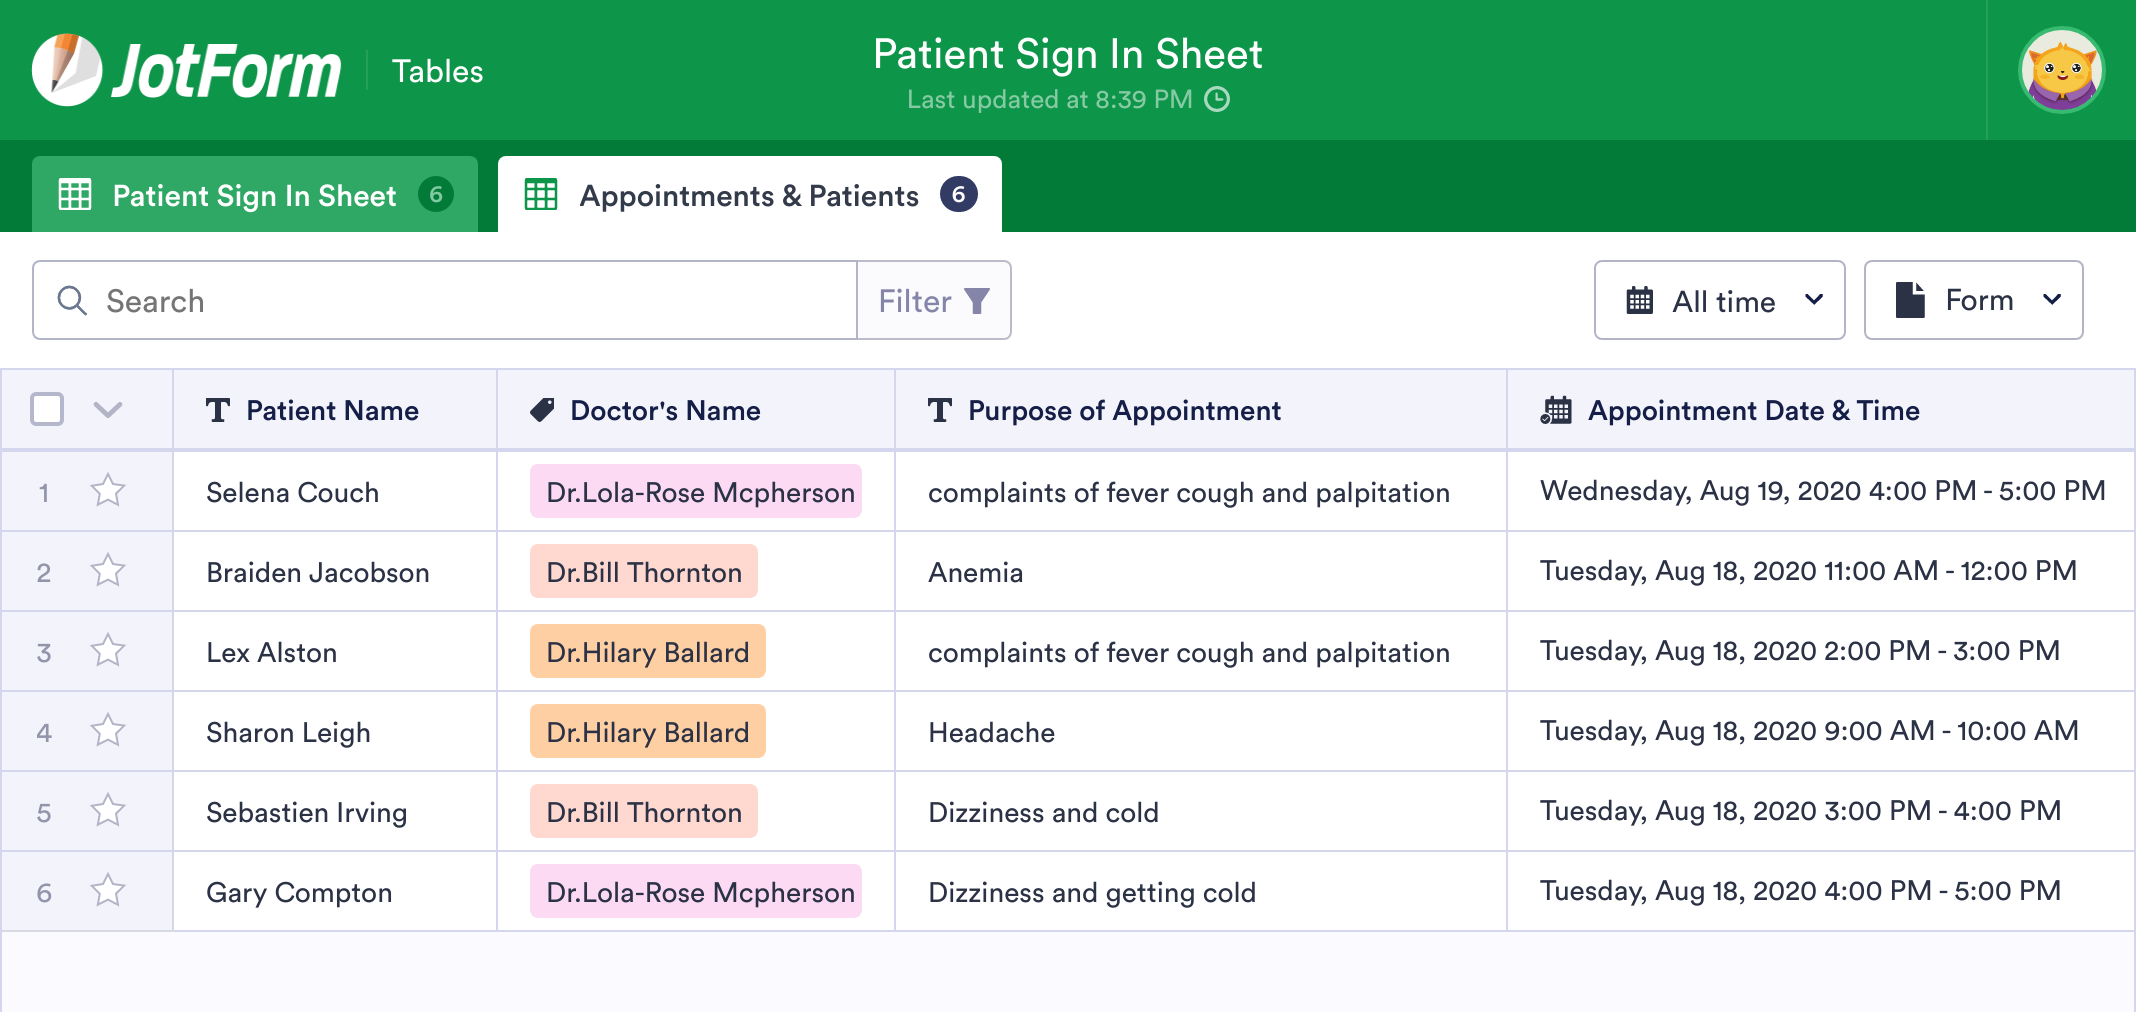 patient-sign-in-sheet-template-jotform-tables